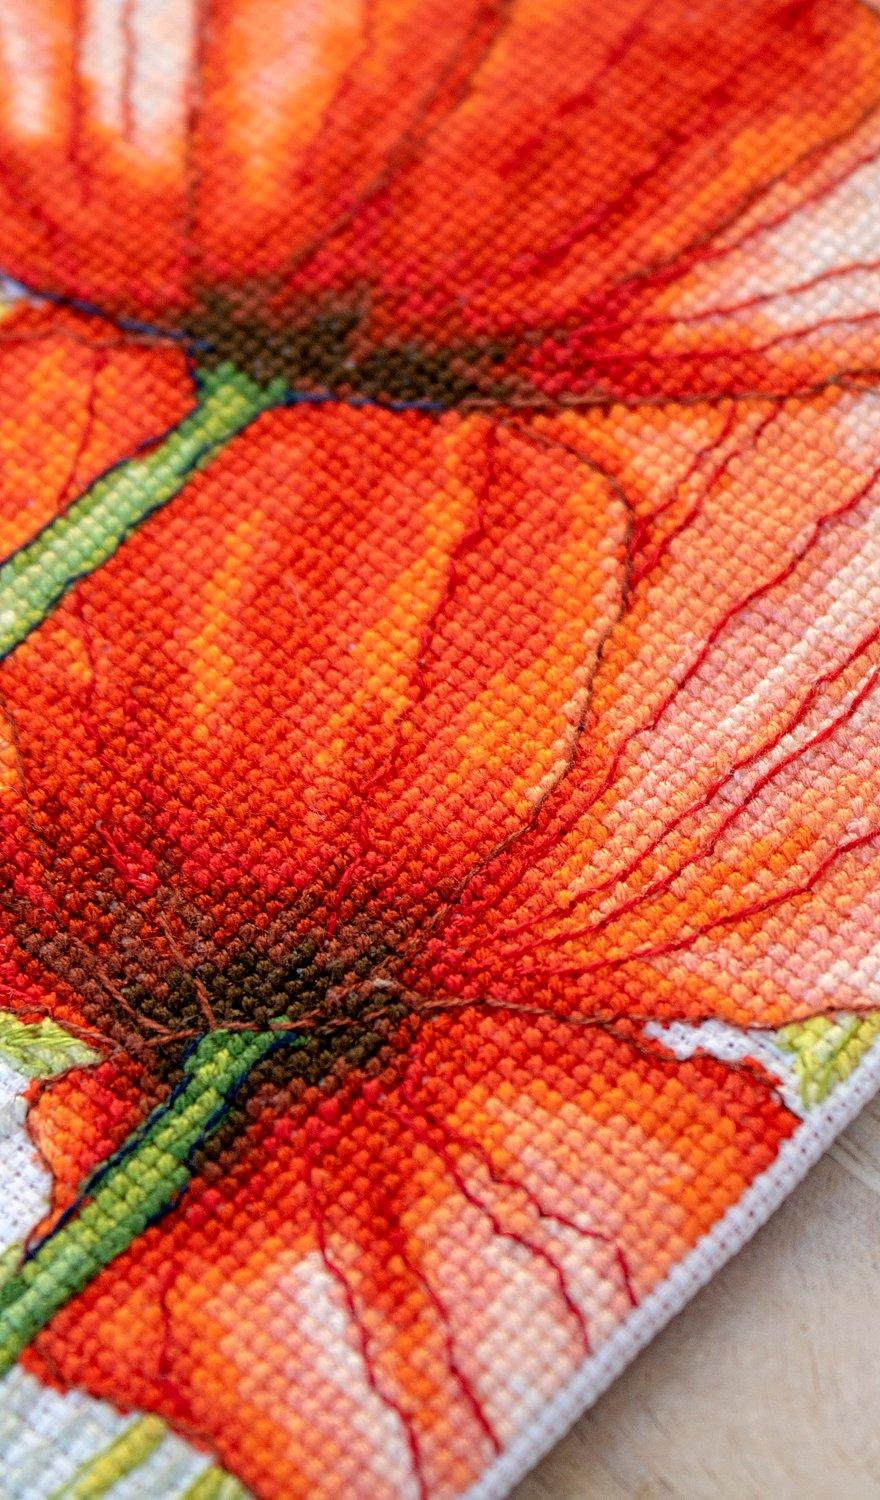 Cross Stitch Kit Luca-S - Poppies and Butterflies, BU4018 - Luca-S Cross Stitch Kits